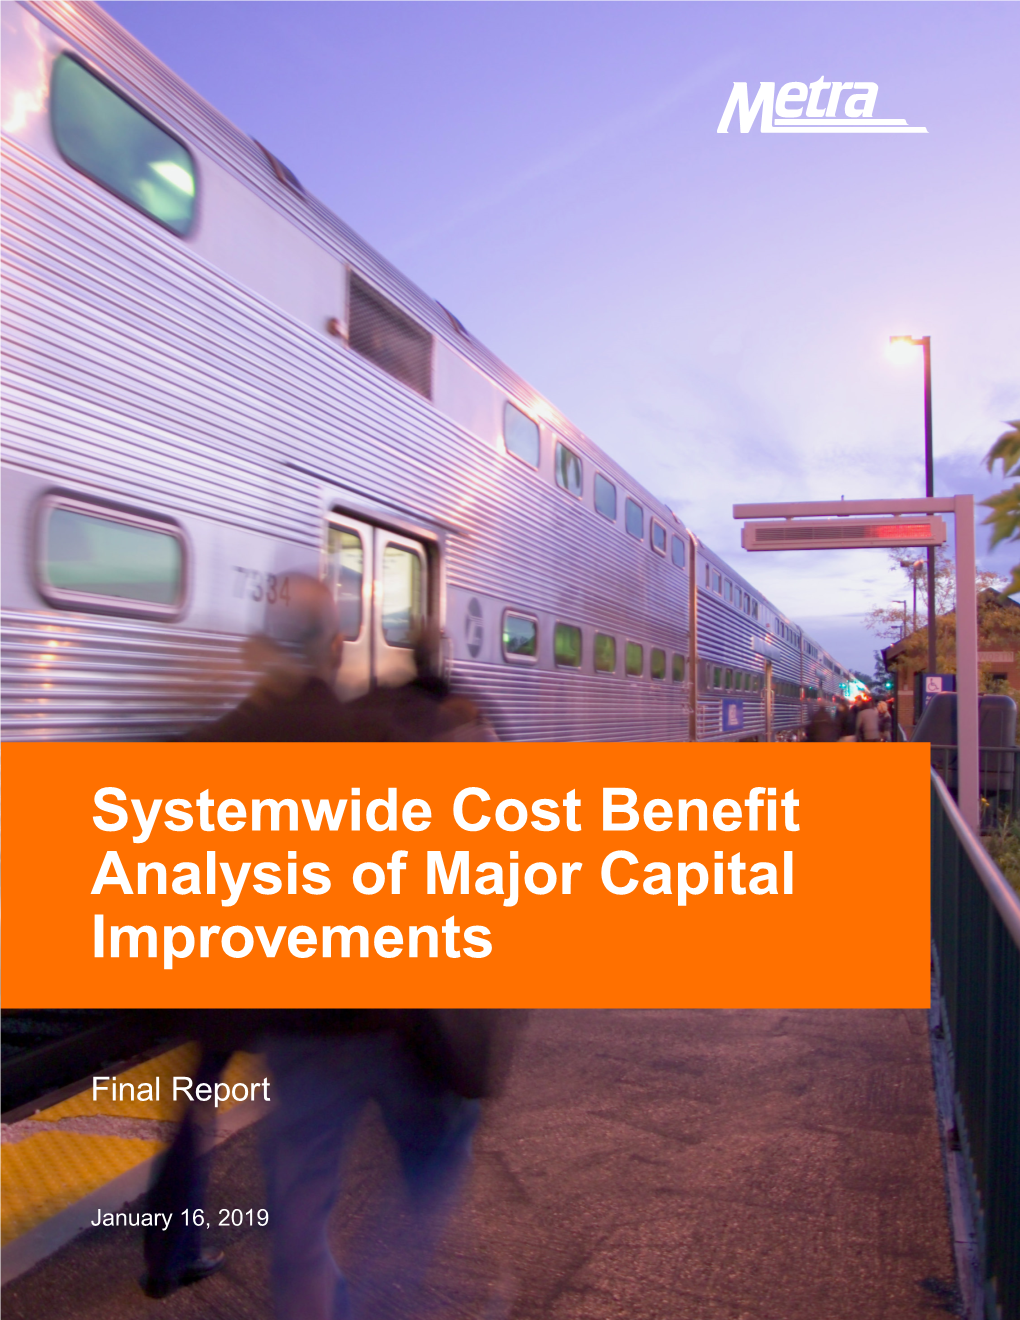 Systemwide Cost Benefit Analysis of Major Capital Improvements